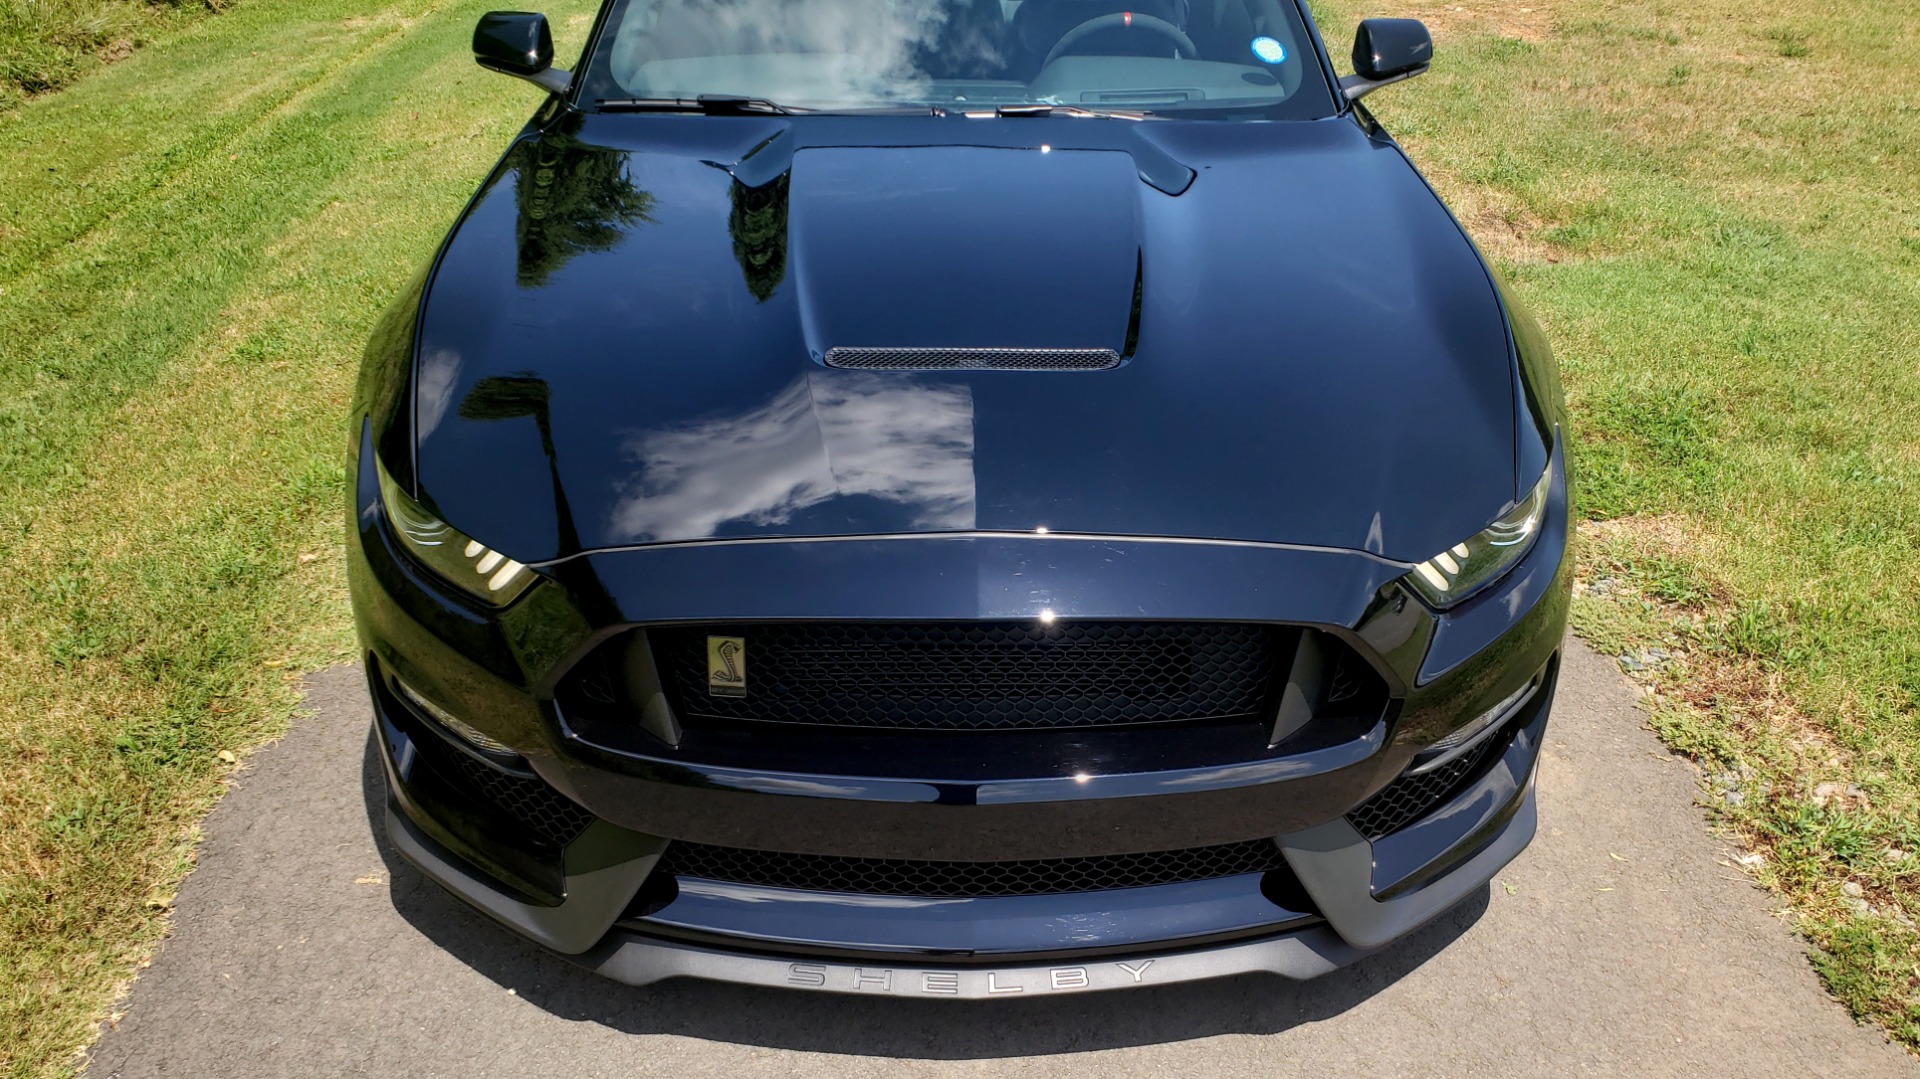 Used 2019 Ford MUSTANG SHELBY GT350 COUPE / TECH PKG / B&O SND / NAV / HNDLNG PKG / REARVIEW for sale Sold at Formula Imports in Charlotte NC 28227 19